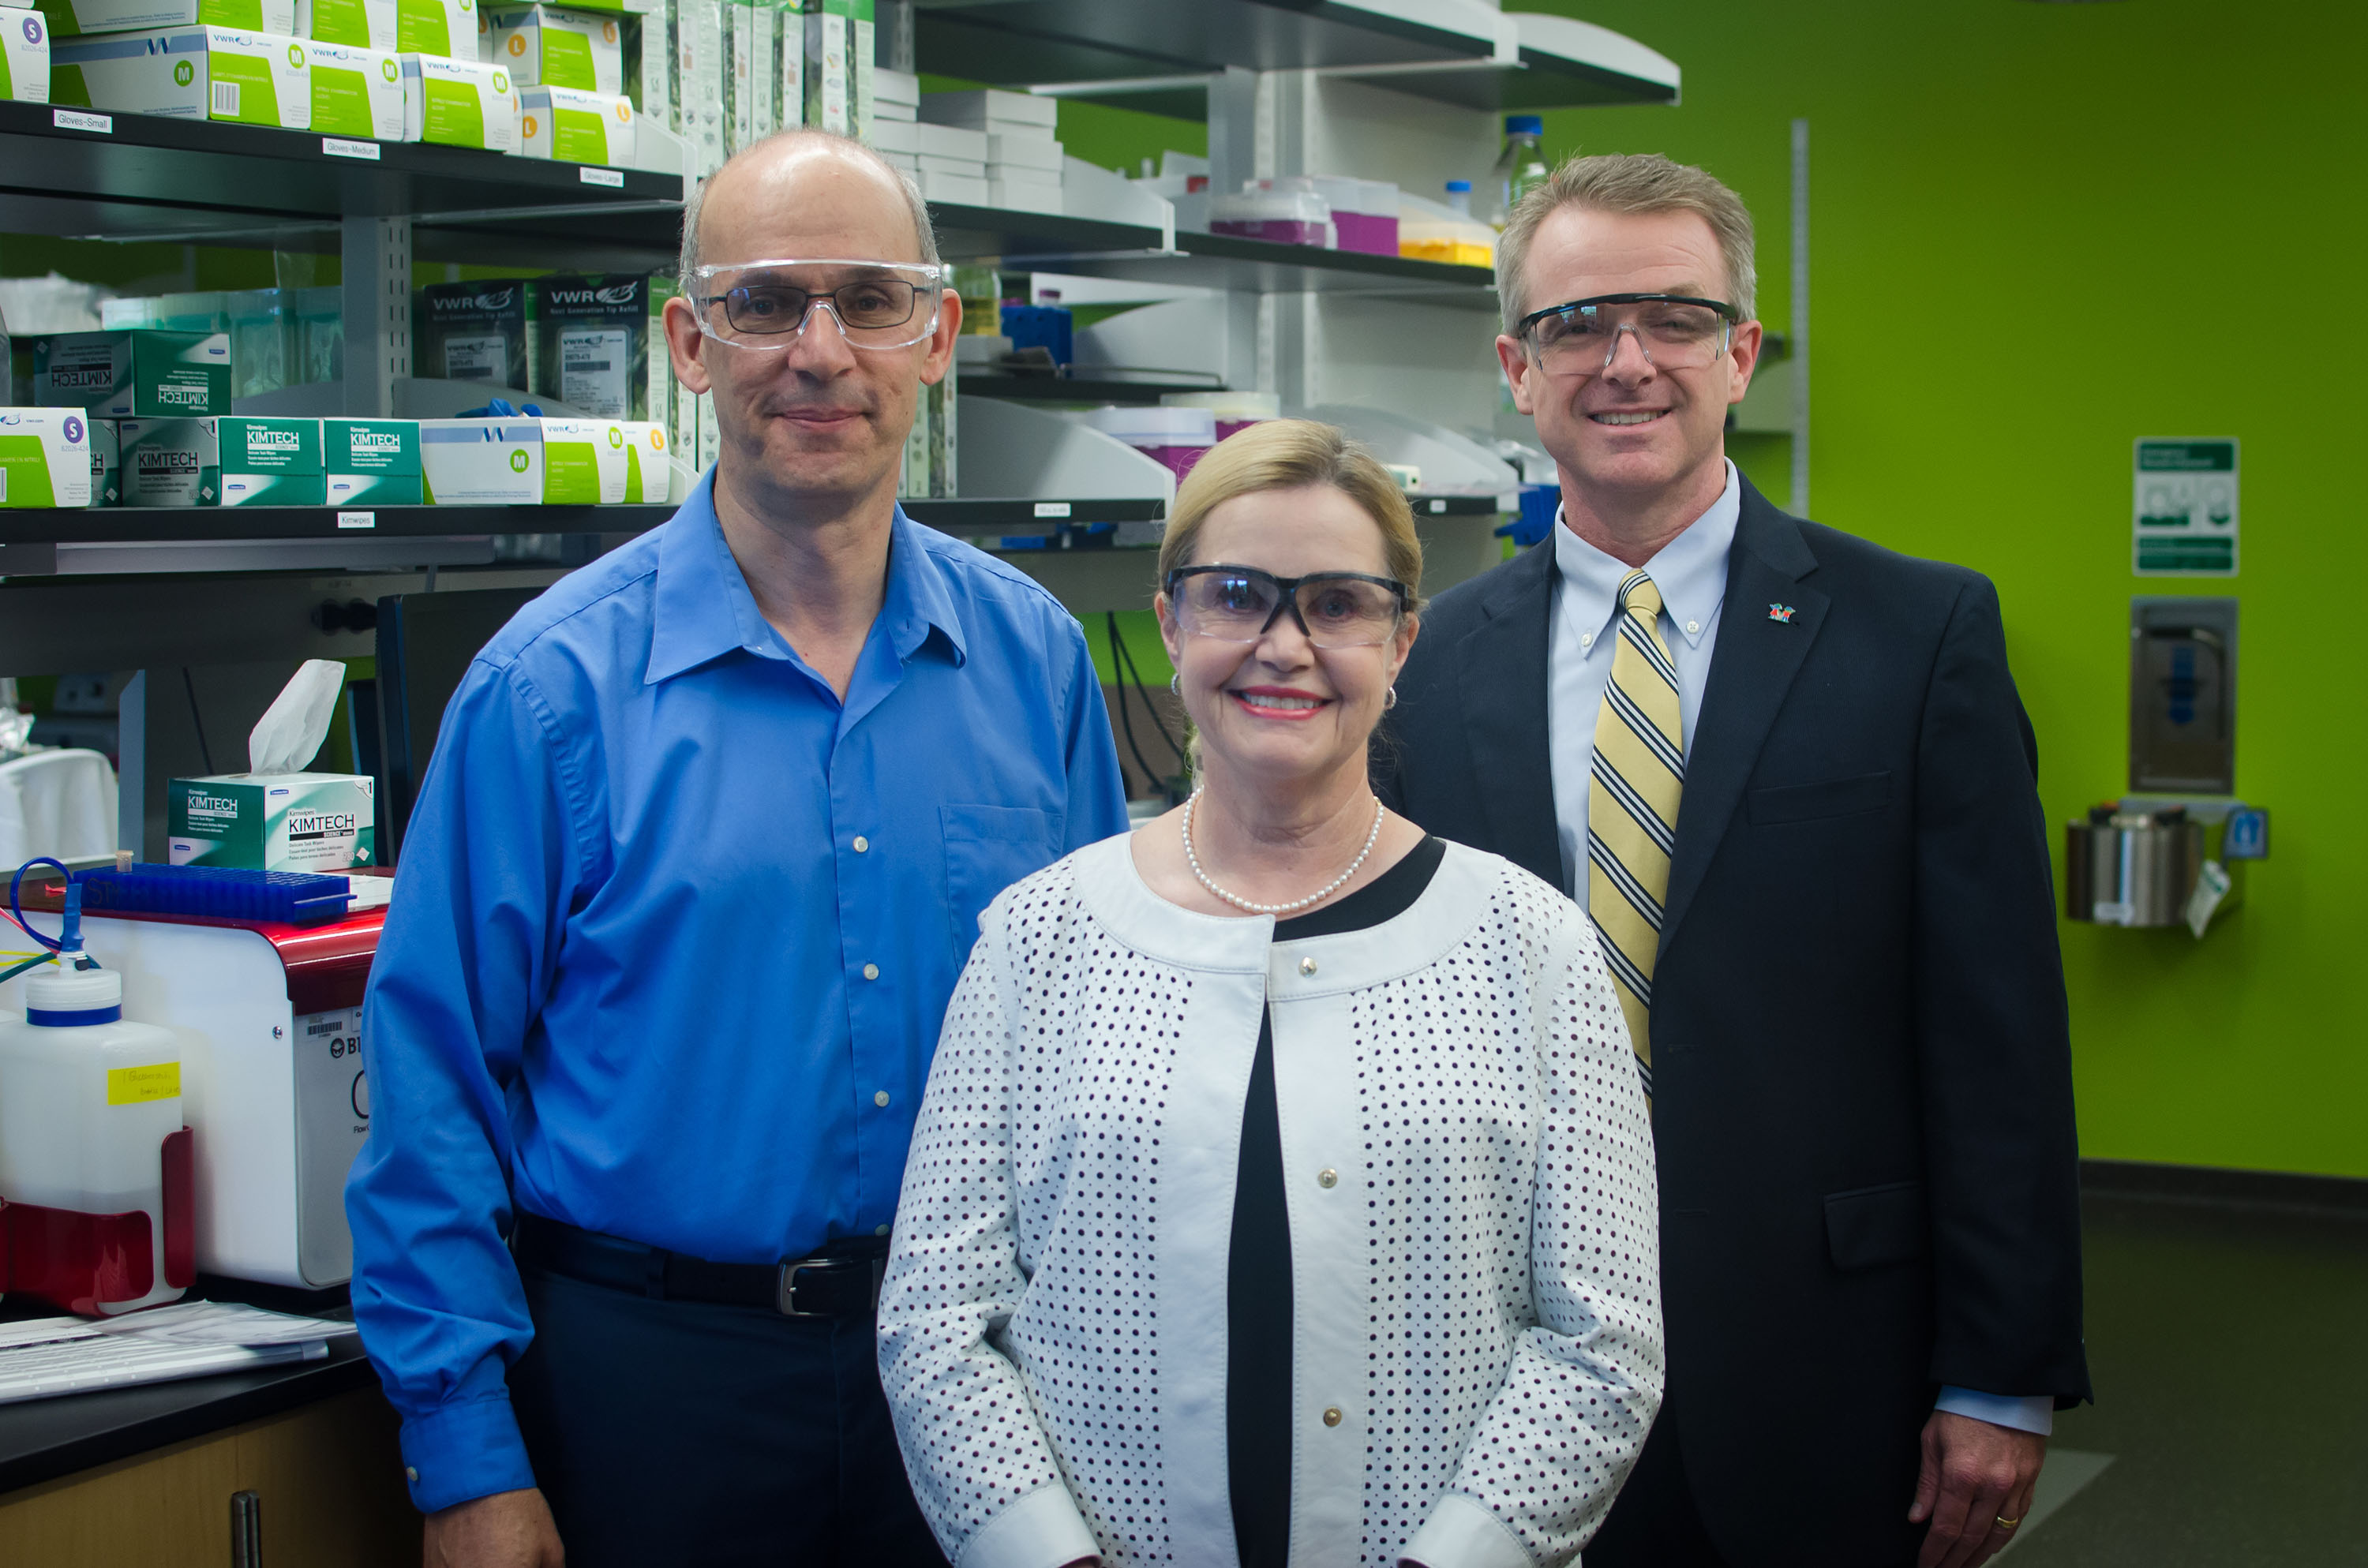 From left, M.G. Finn, Chief Scientific Officer of Georgia Tech's Pediatric Technology Center and chair of the Chemistry Department; Mary Ellen Imlay, chair of the Imlay Foundation; and Dr. Patrick Frias, chief operating officer at Children's Healthcare of Atlanta, in a laboratory in the Engineered Biosystems Building where research takes place as a part of the Children's-Georgia Tech partnership.